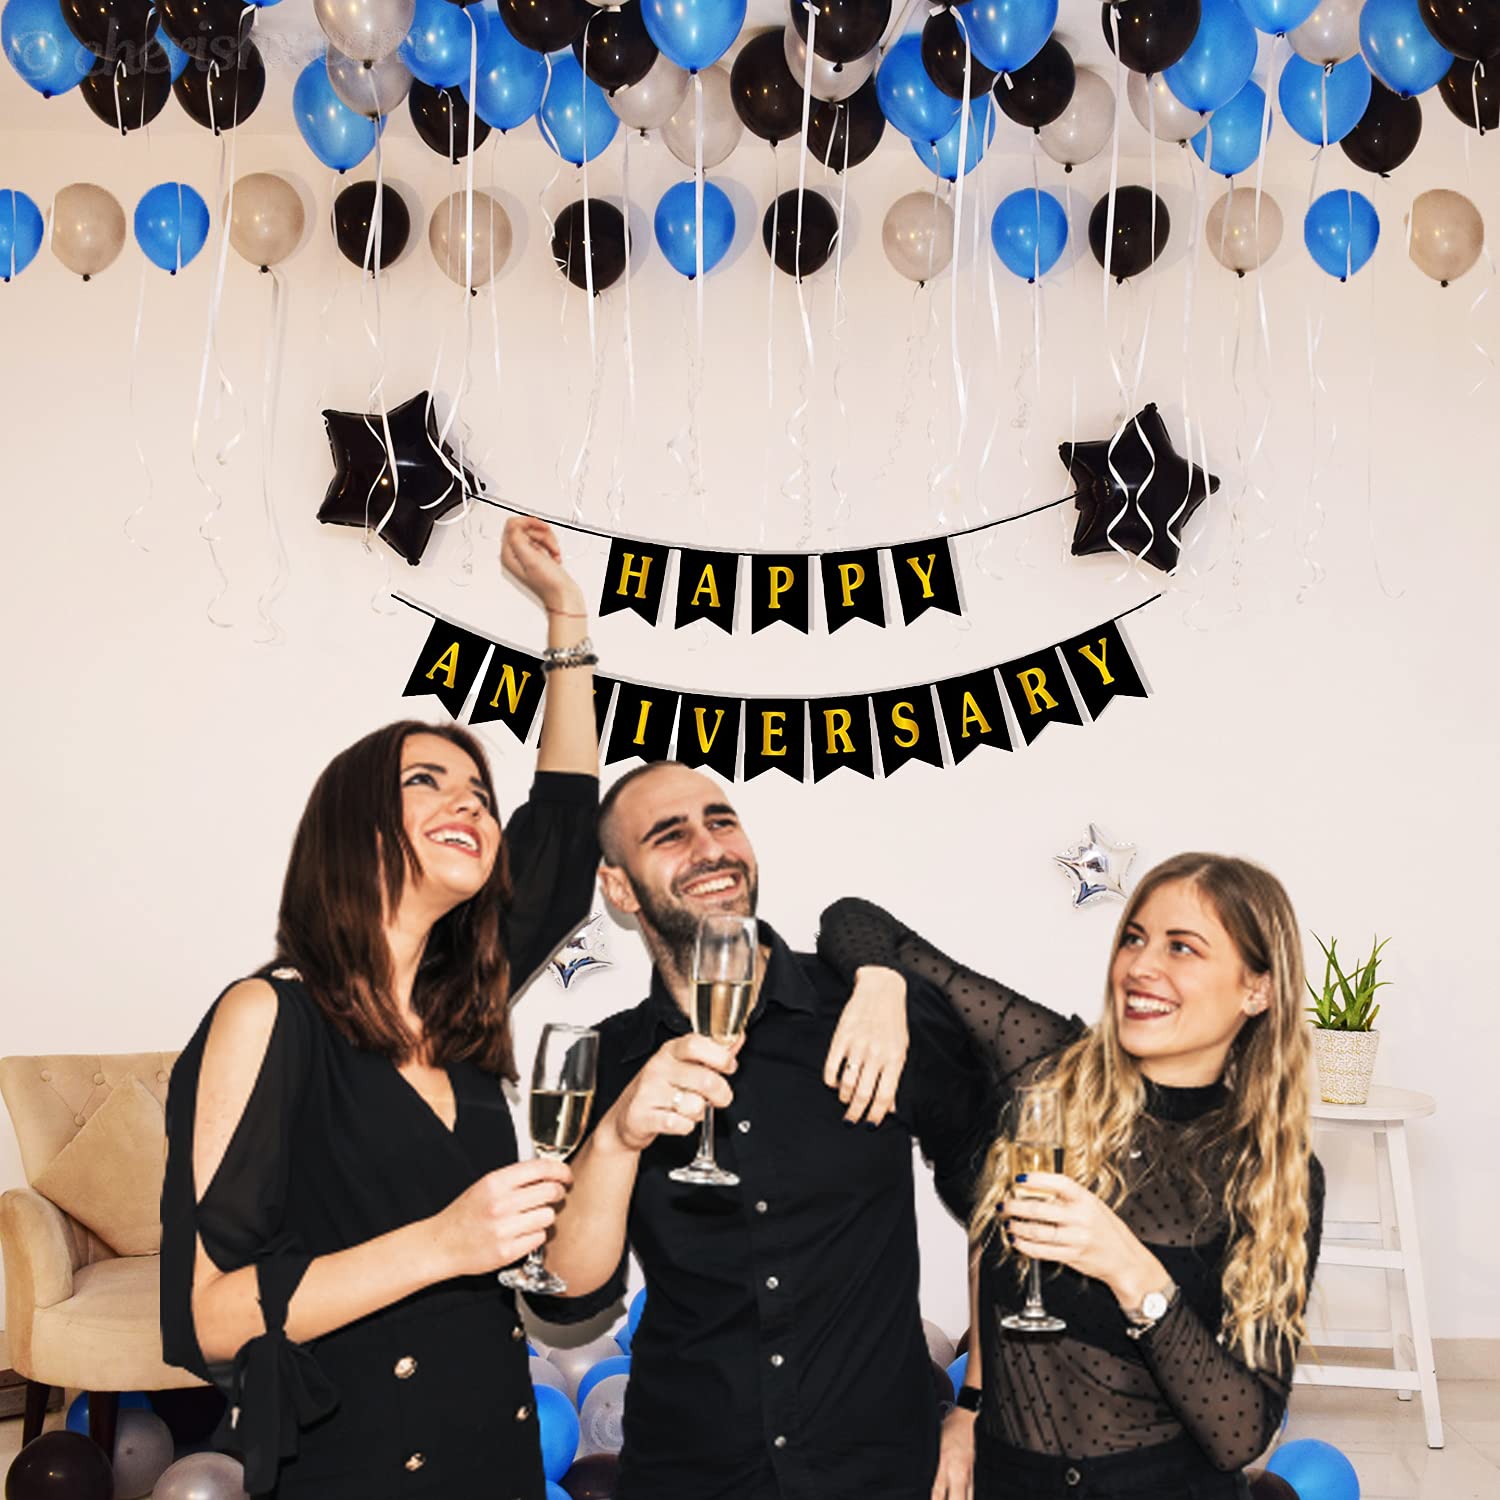 Blue & Black Happy Anniversary Decoration Items For Room - Pack of 49 Pcs - Bunting, Star Shape Foil & Metallic Balloons - Wall Backdrop Decoration - CherishX Partystore